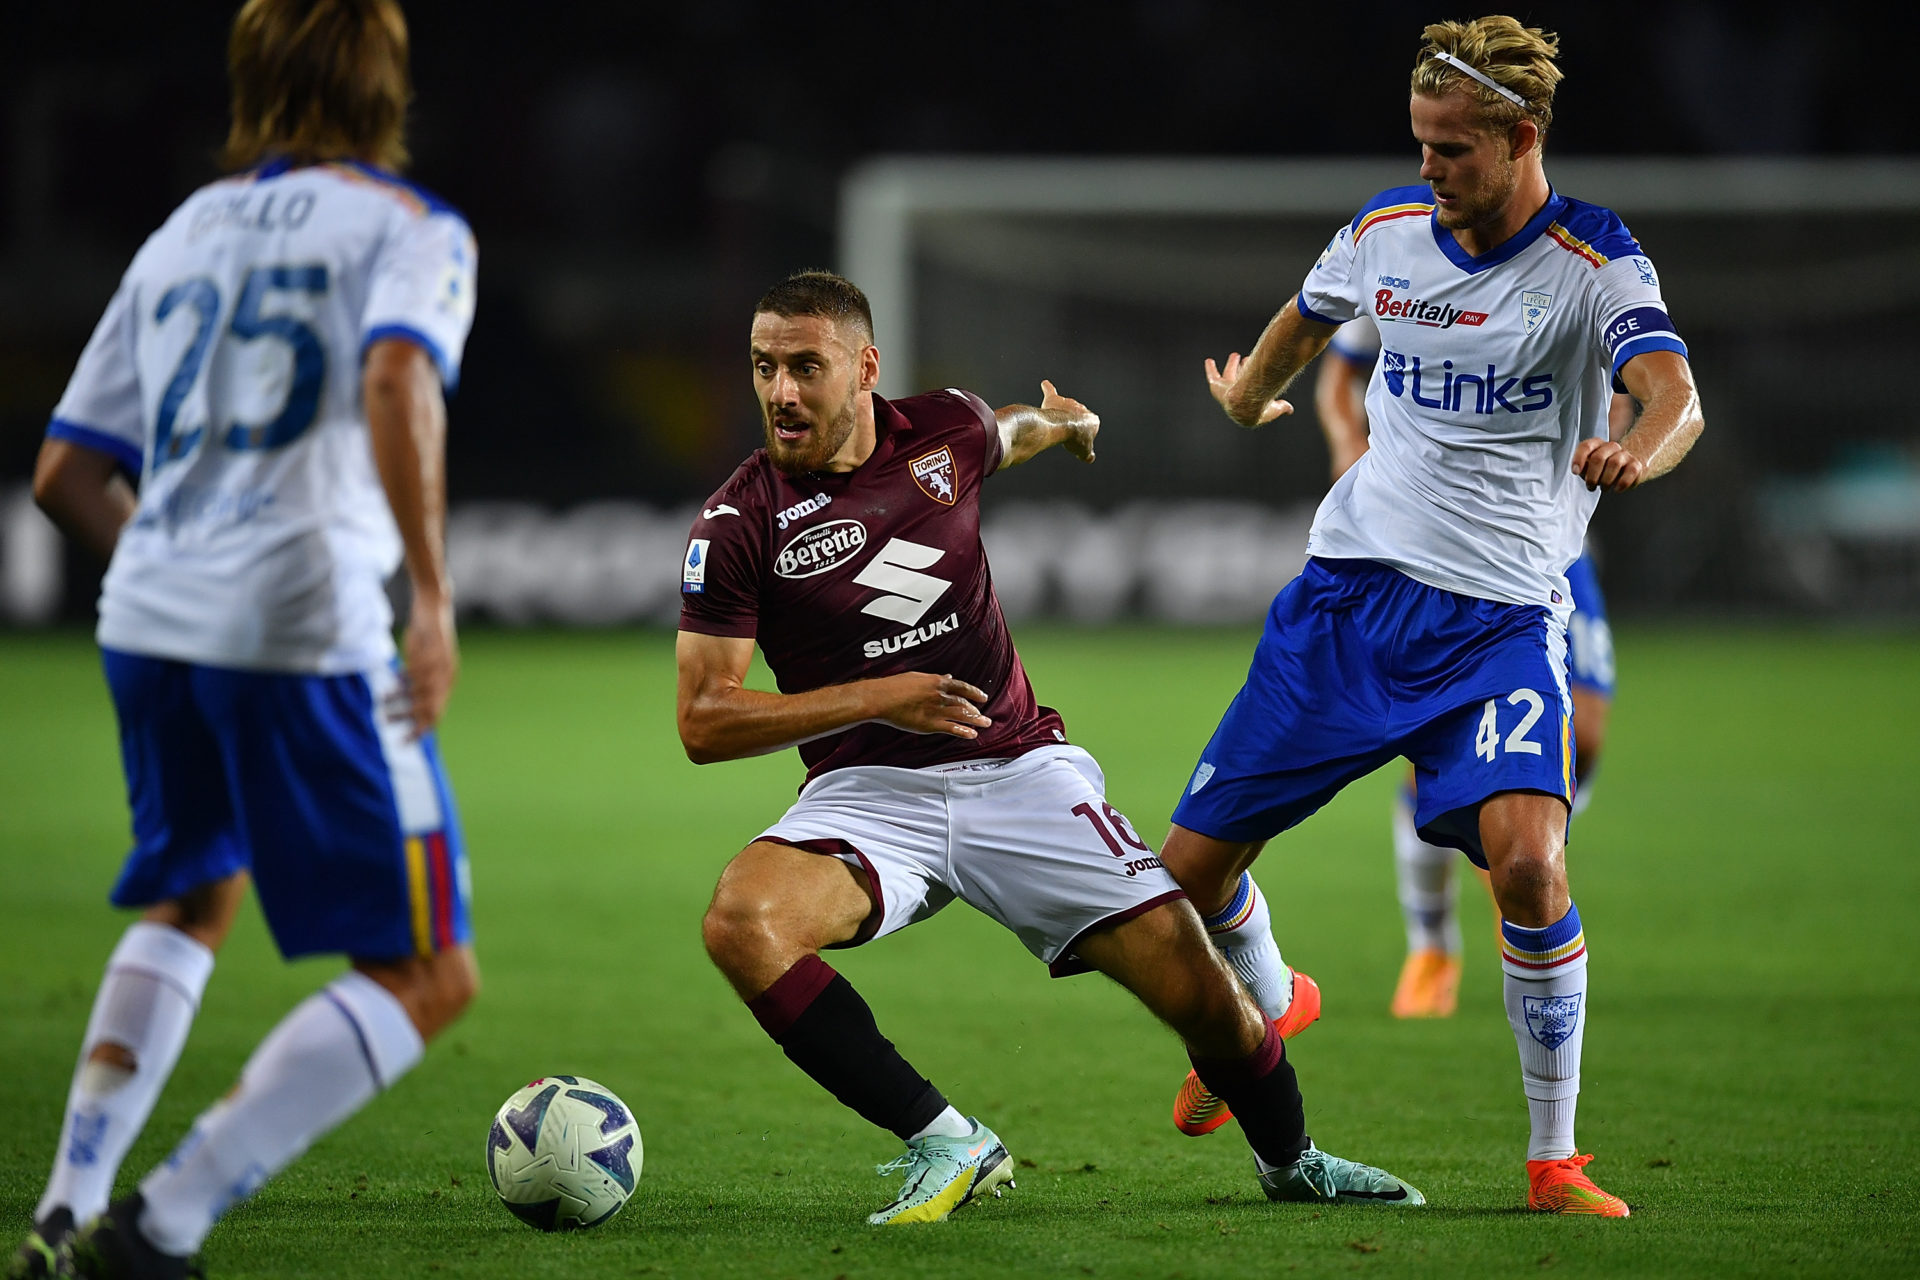 Nikola Vlasic has made a fine start to life with Torino after joining on loan from West Ham